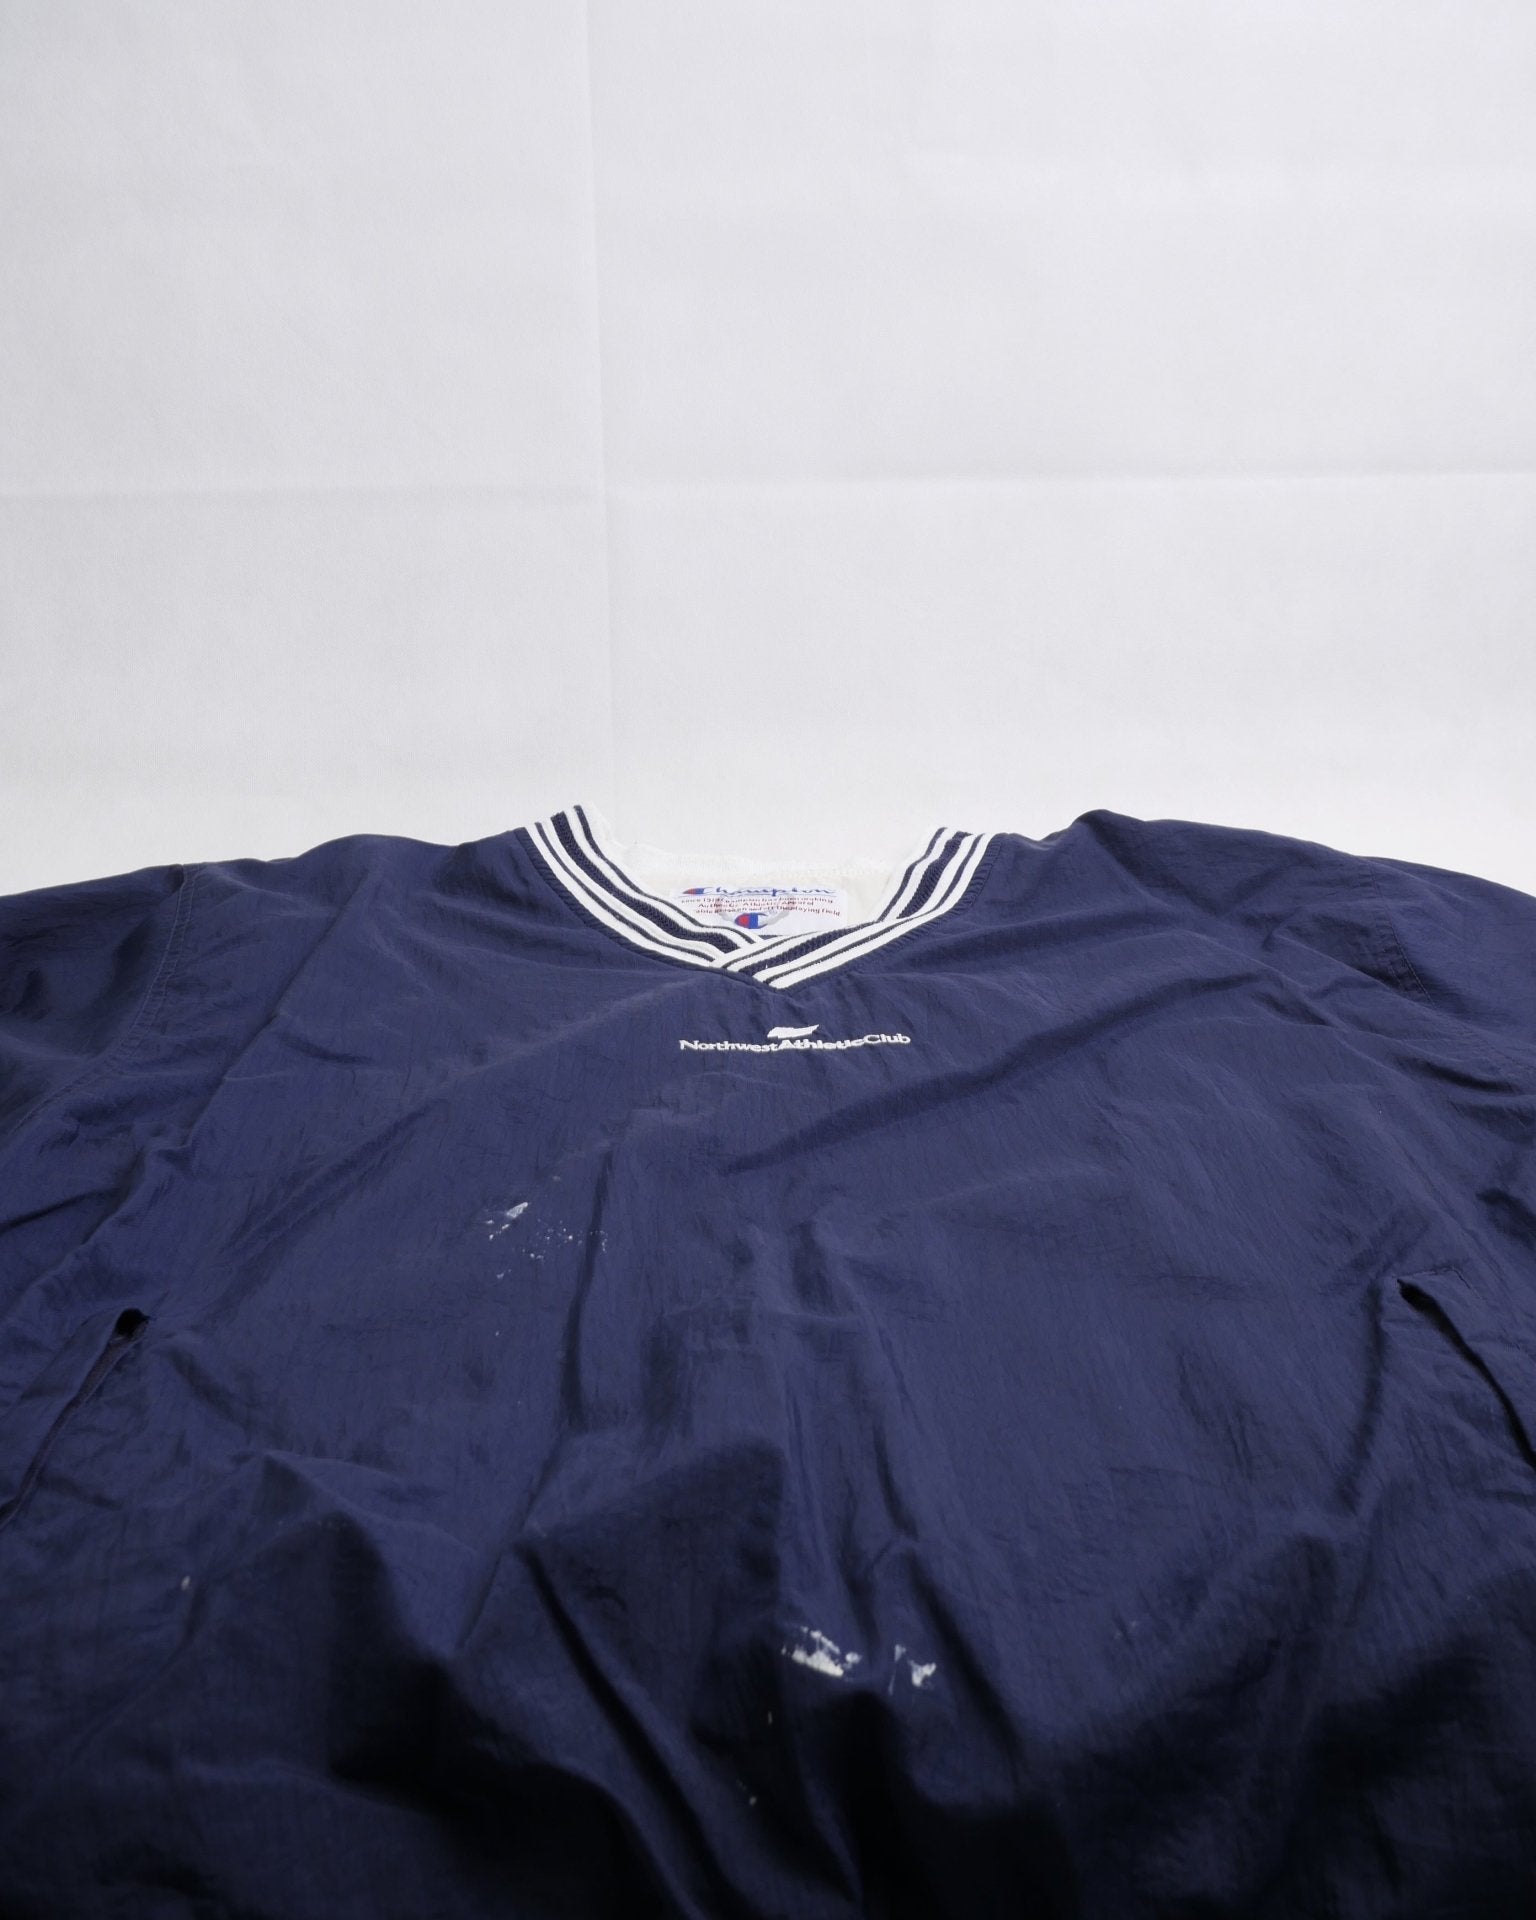 Champion embroidered Logo 'Northwest Athletic Club' navy Jersey Sweater - Peeces